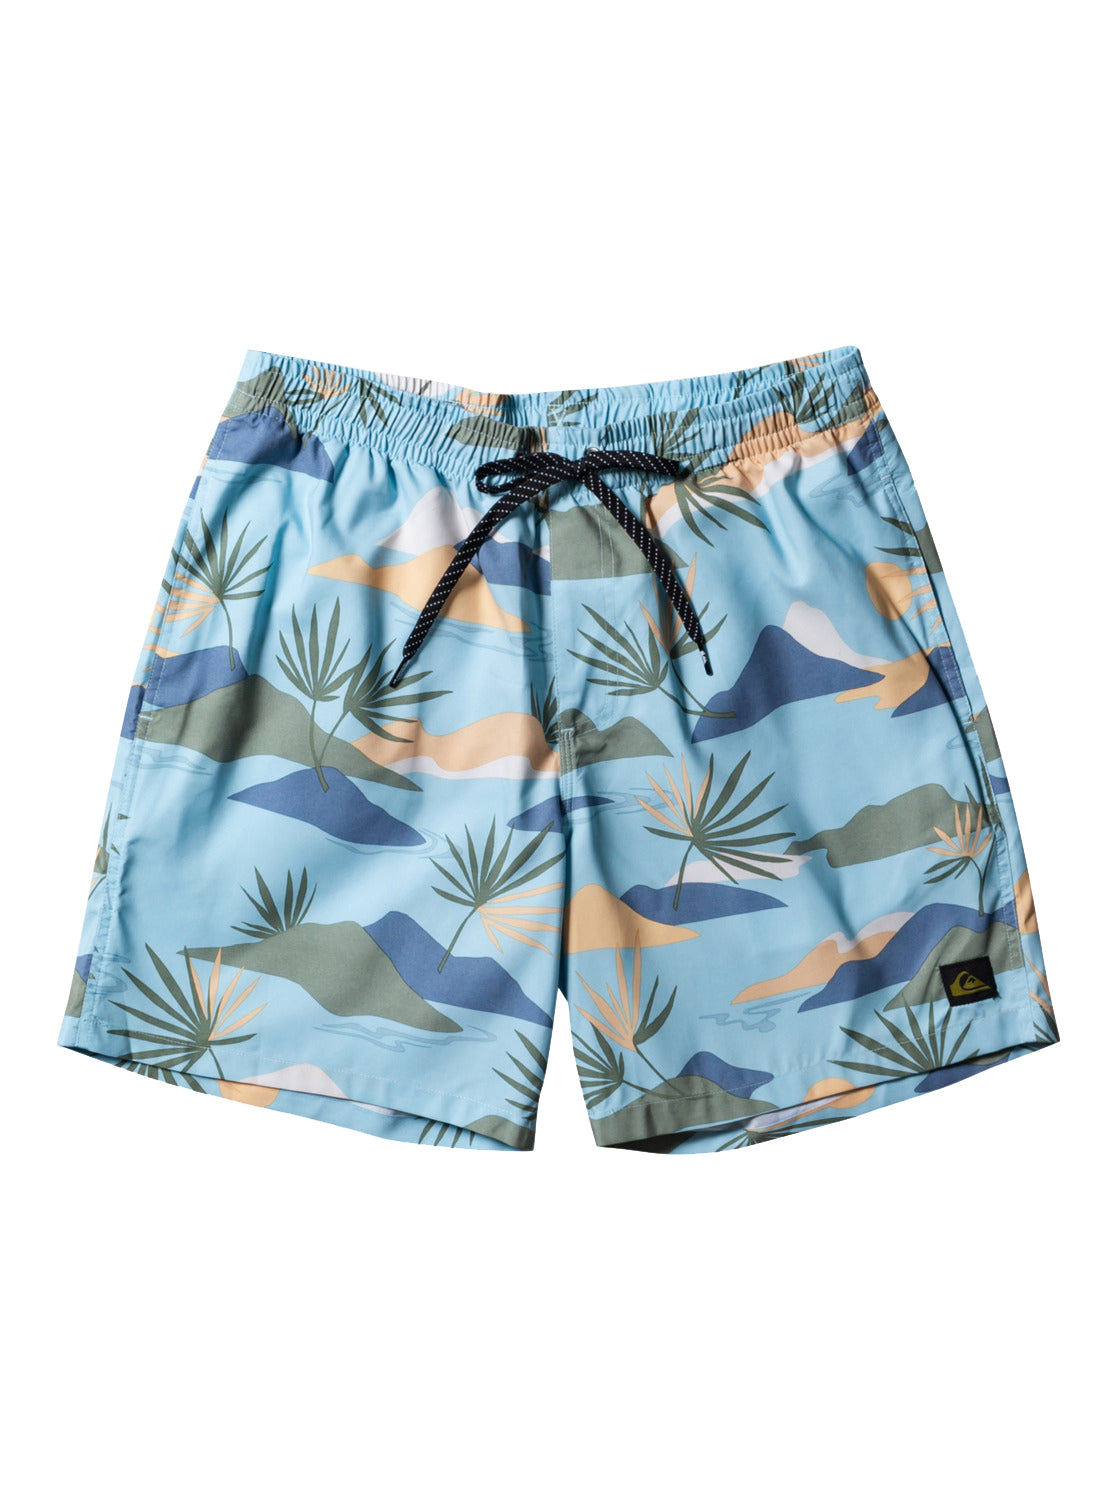 Quiksilver Everyday Jam Mixed Volley 17" Shorts BGC7 M